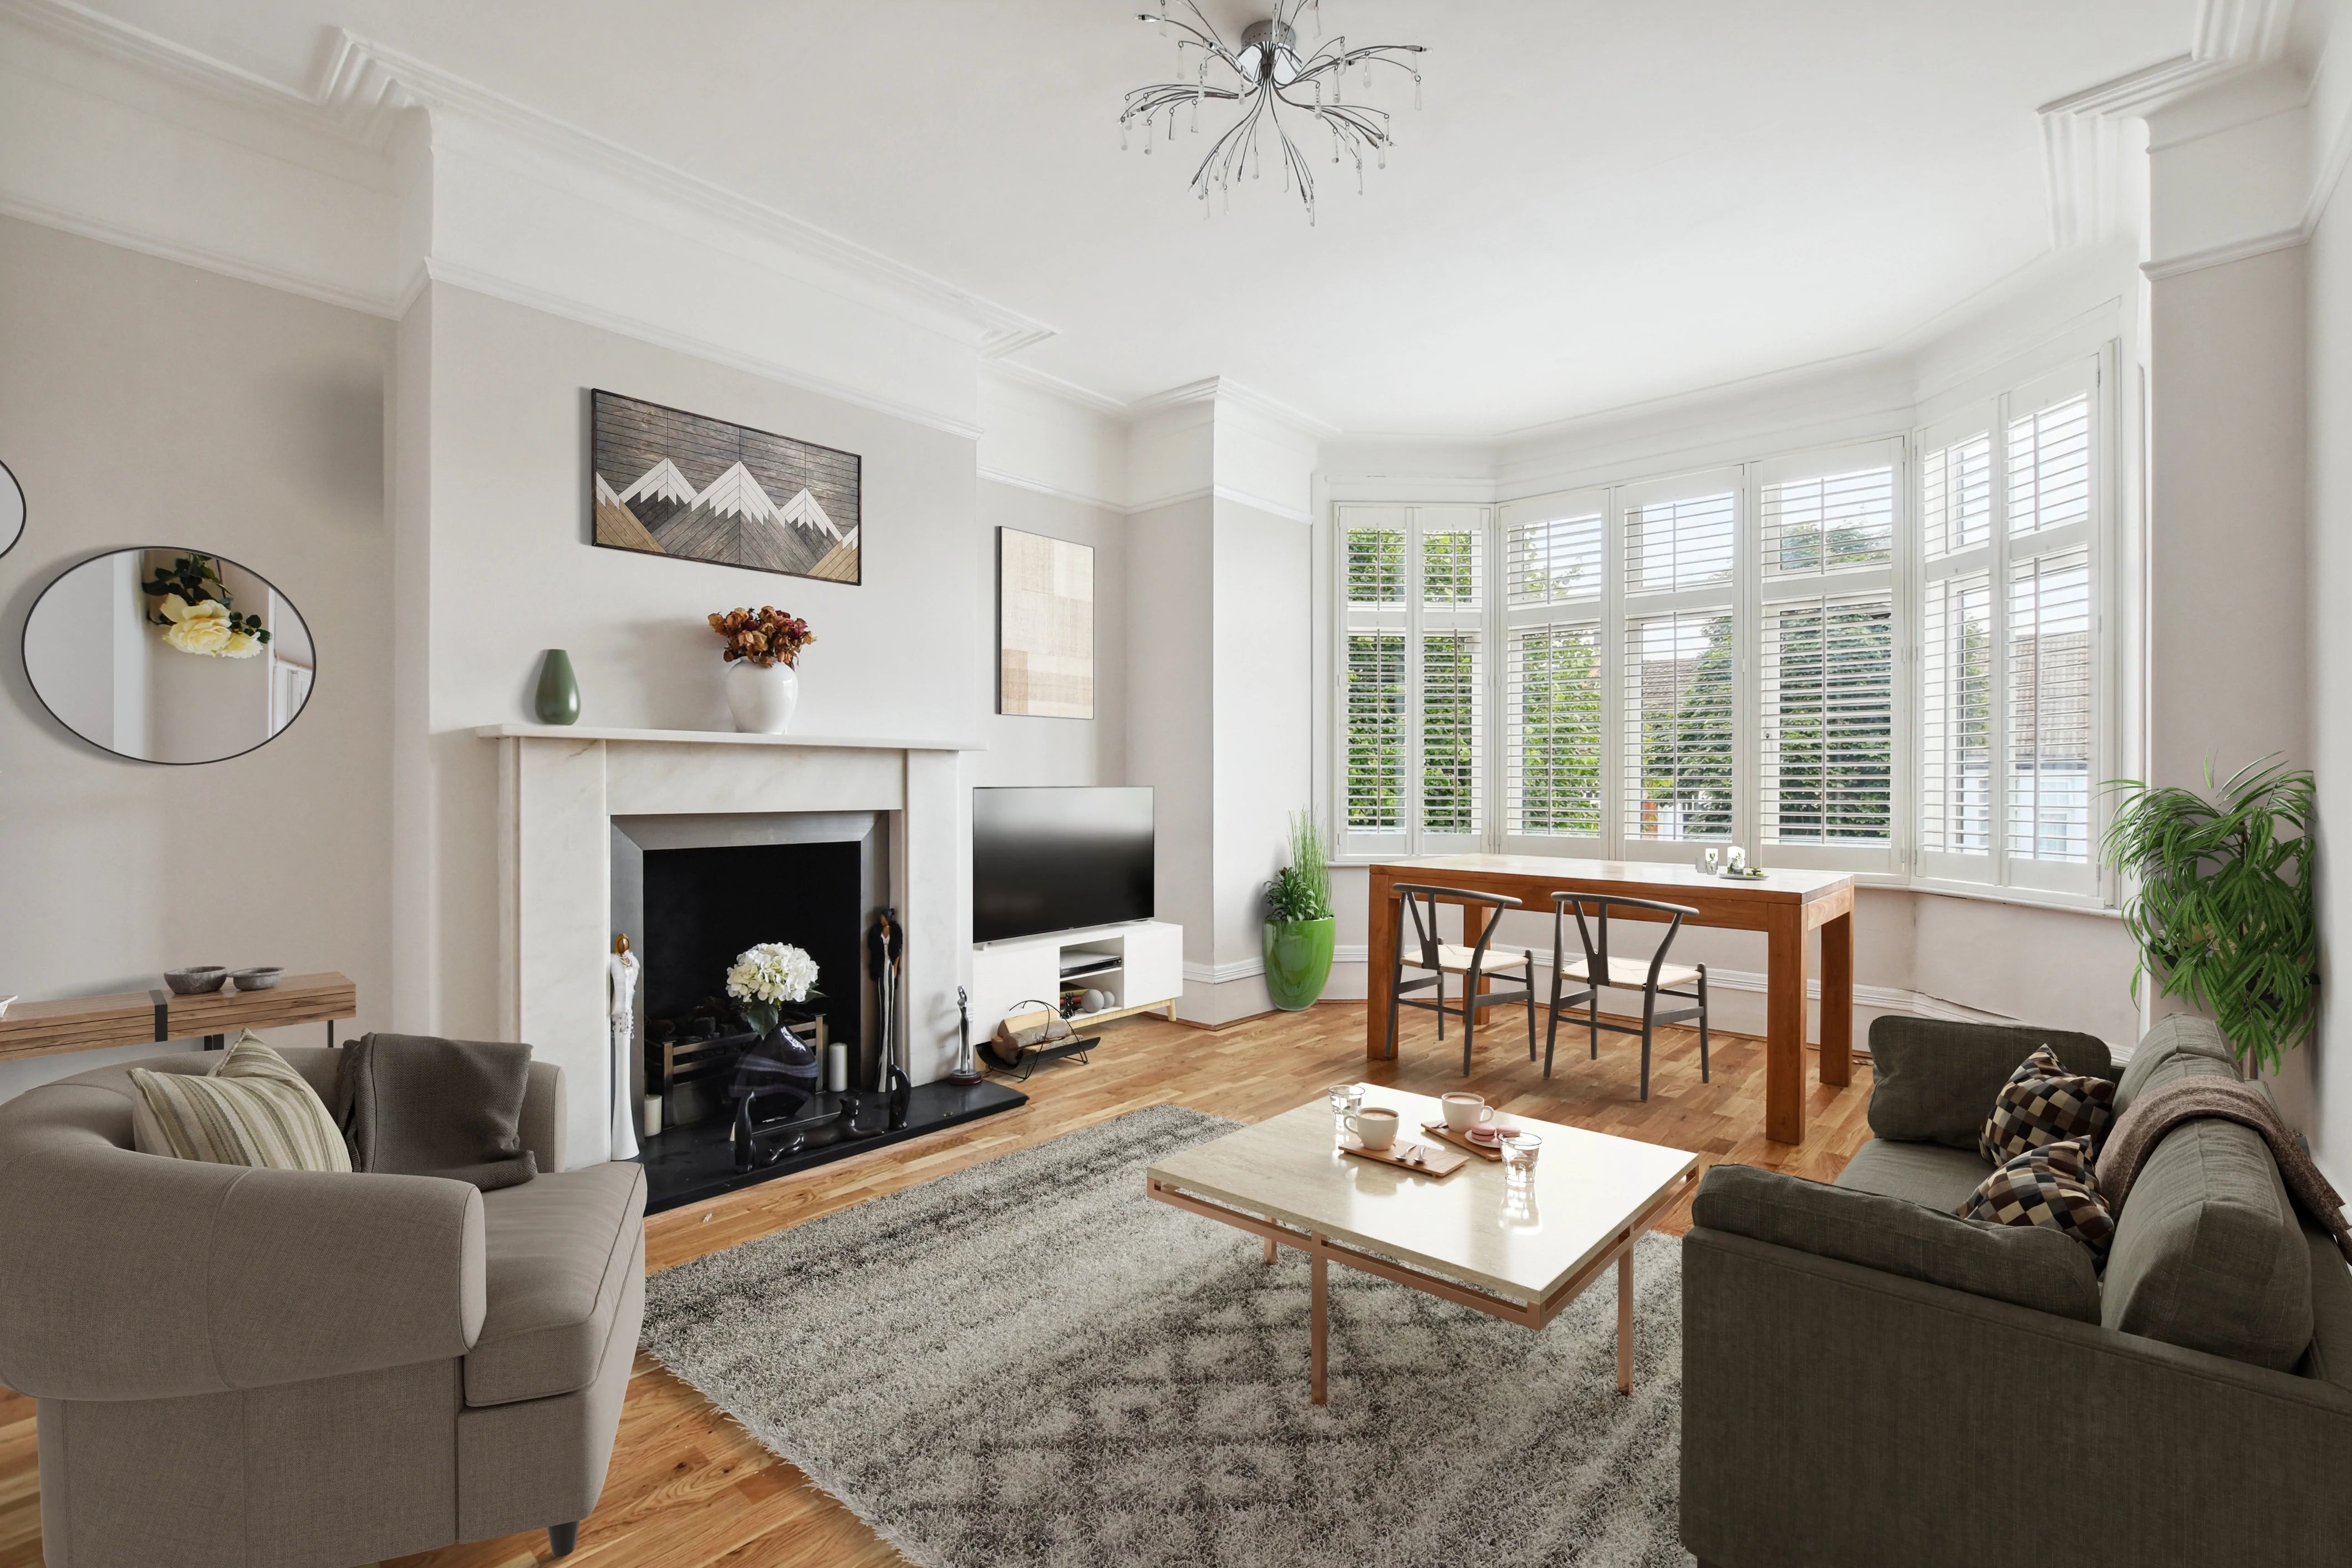 Virtual Staging - Still Images